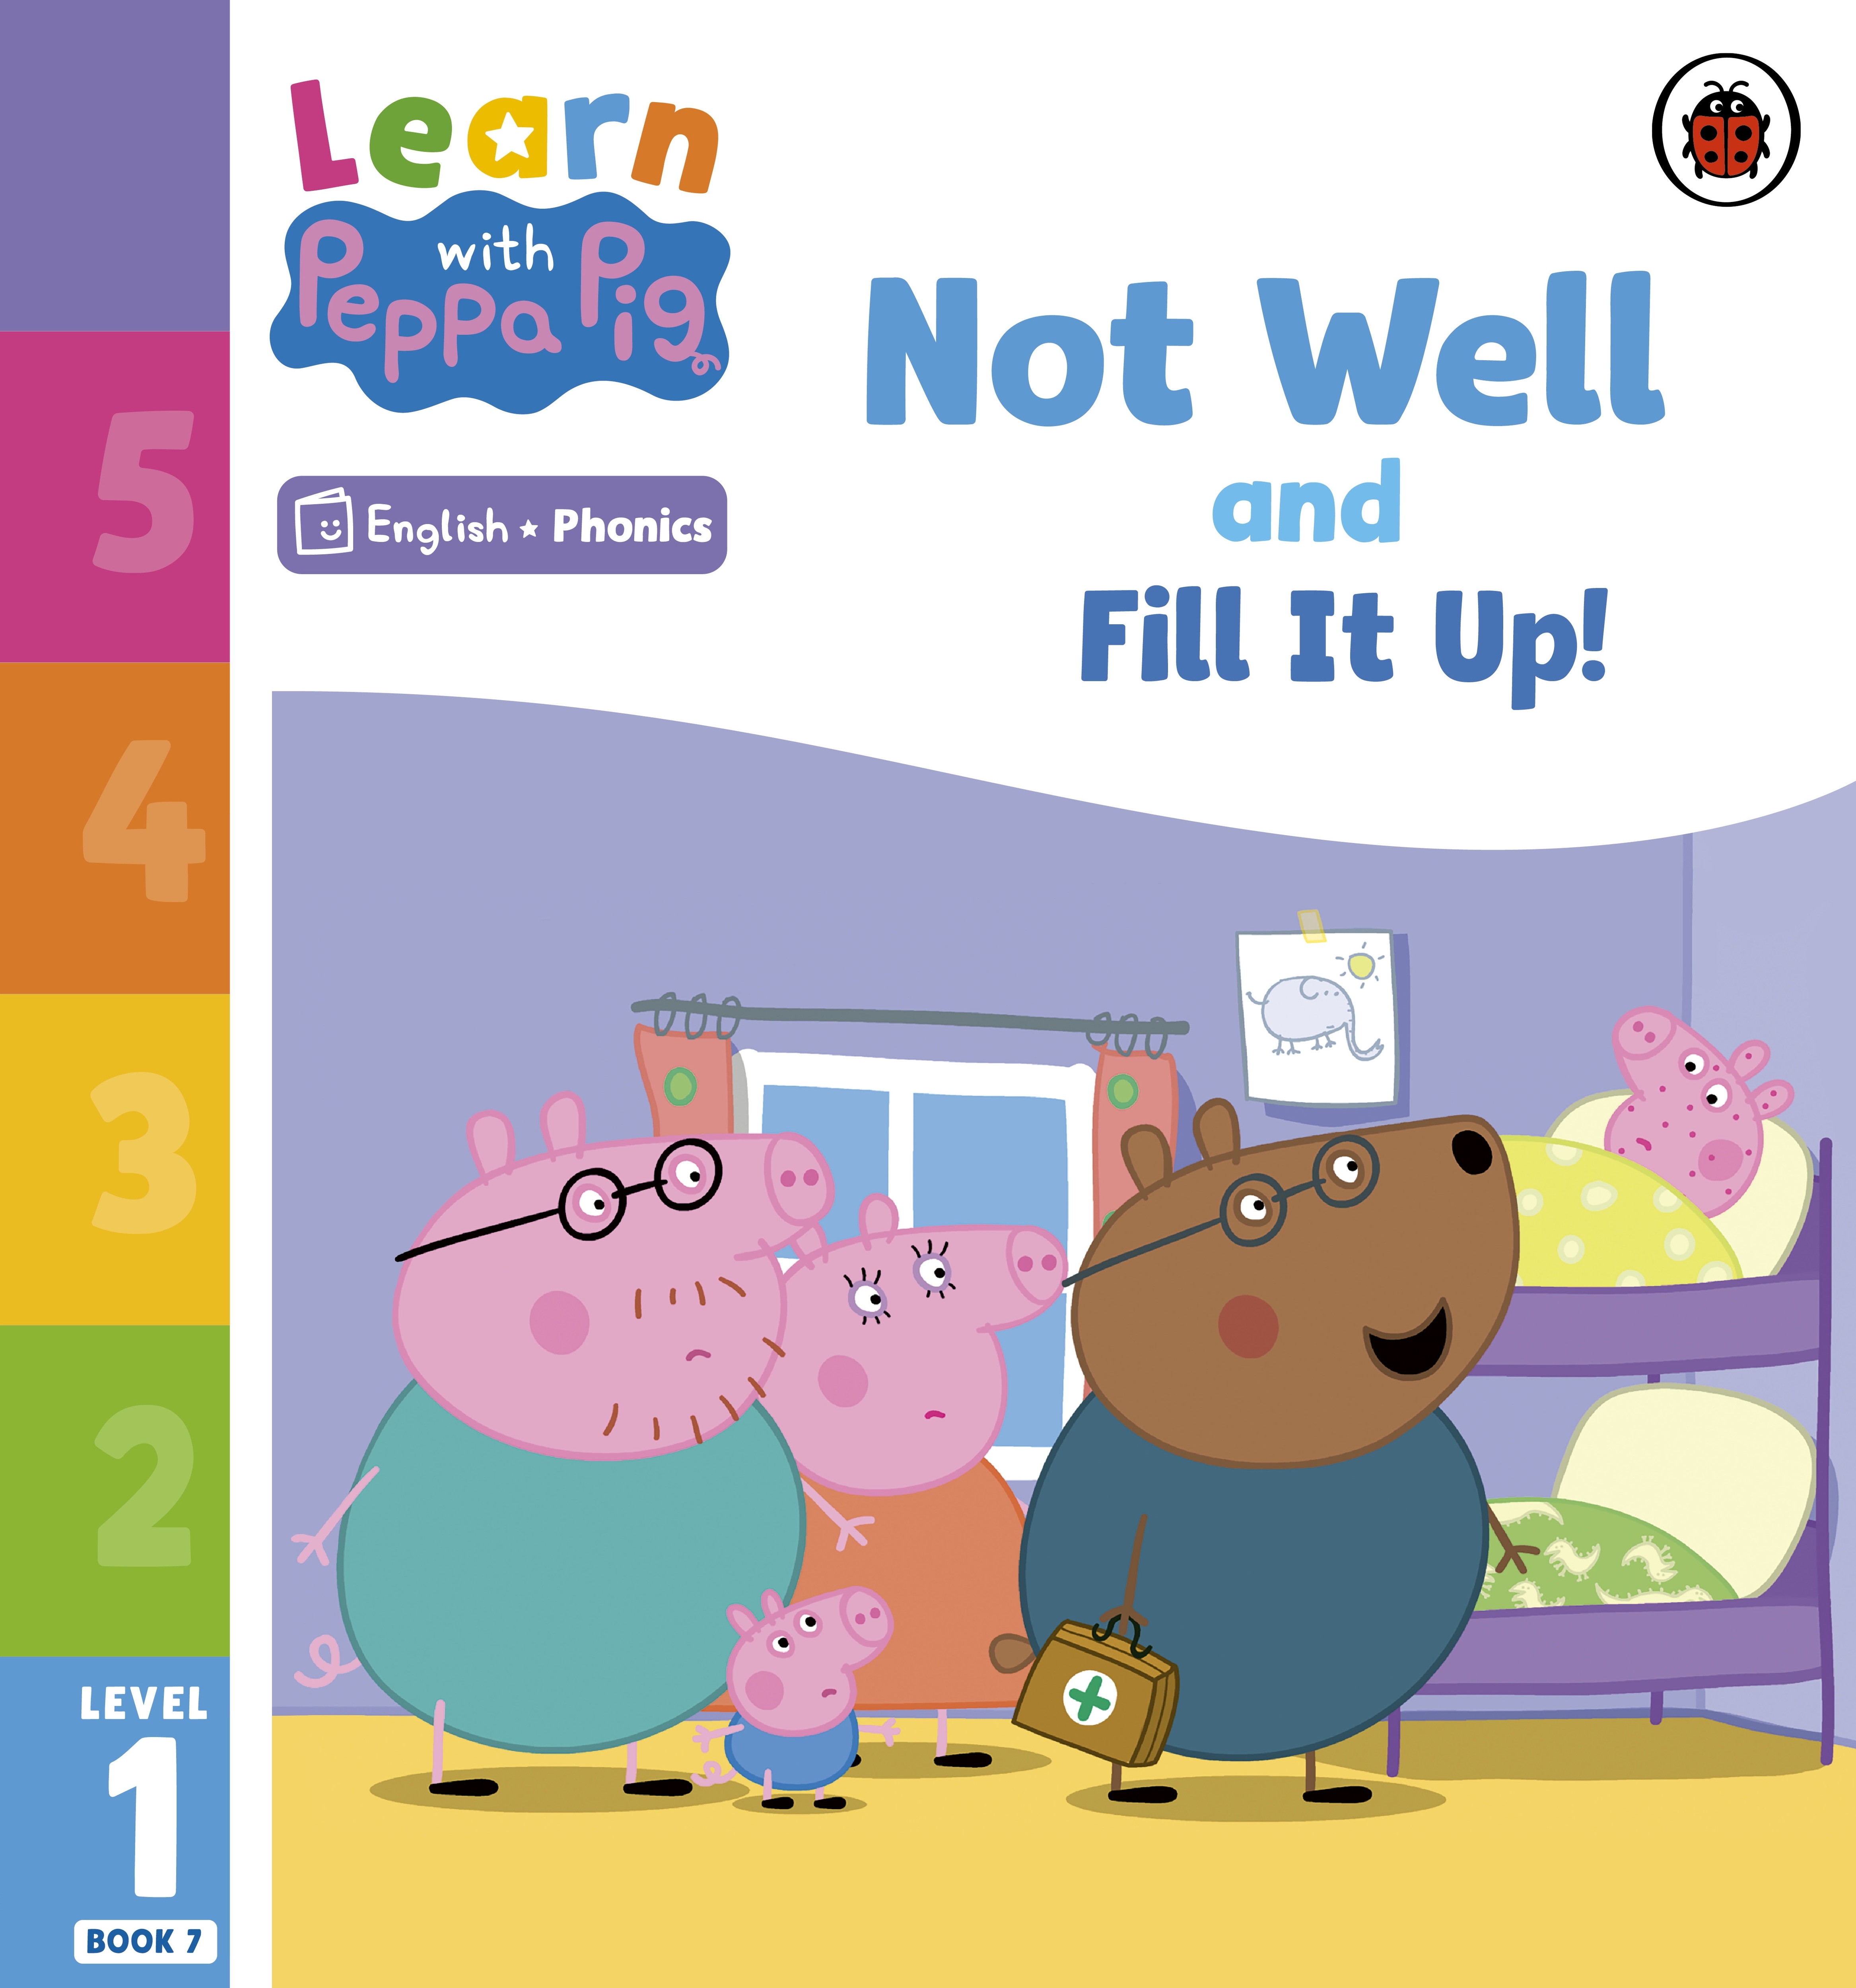 Learn with Peppa Phonics Level 1 Book 7 — Not Well and Fill it Up! (Phonics Reader)